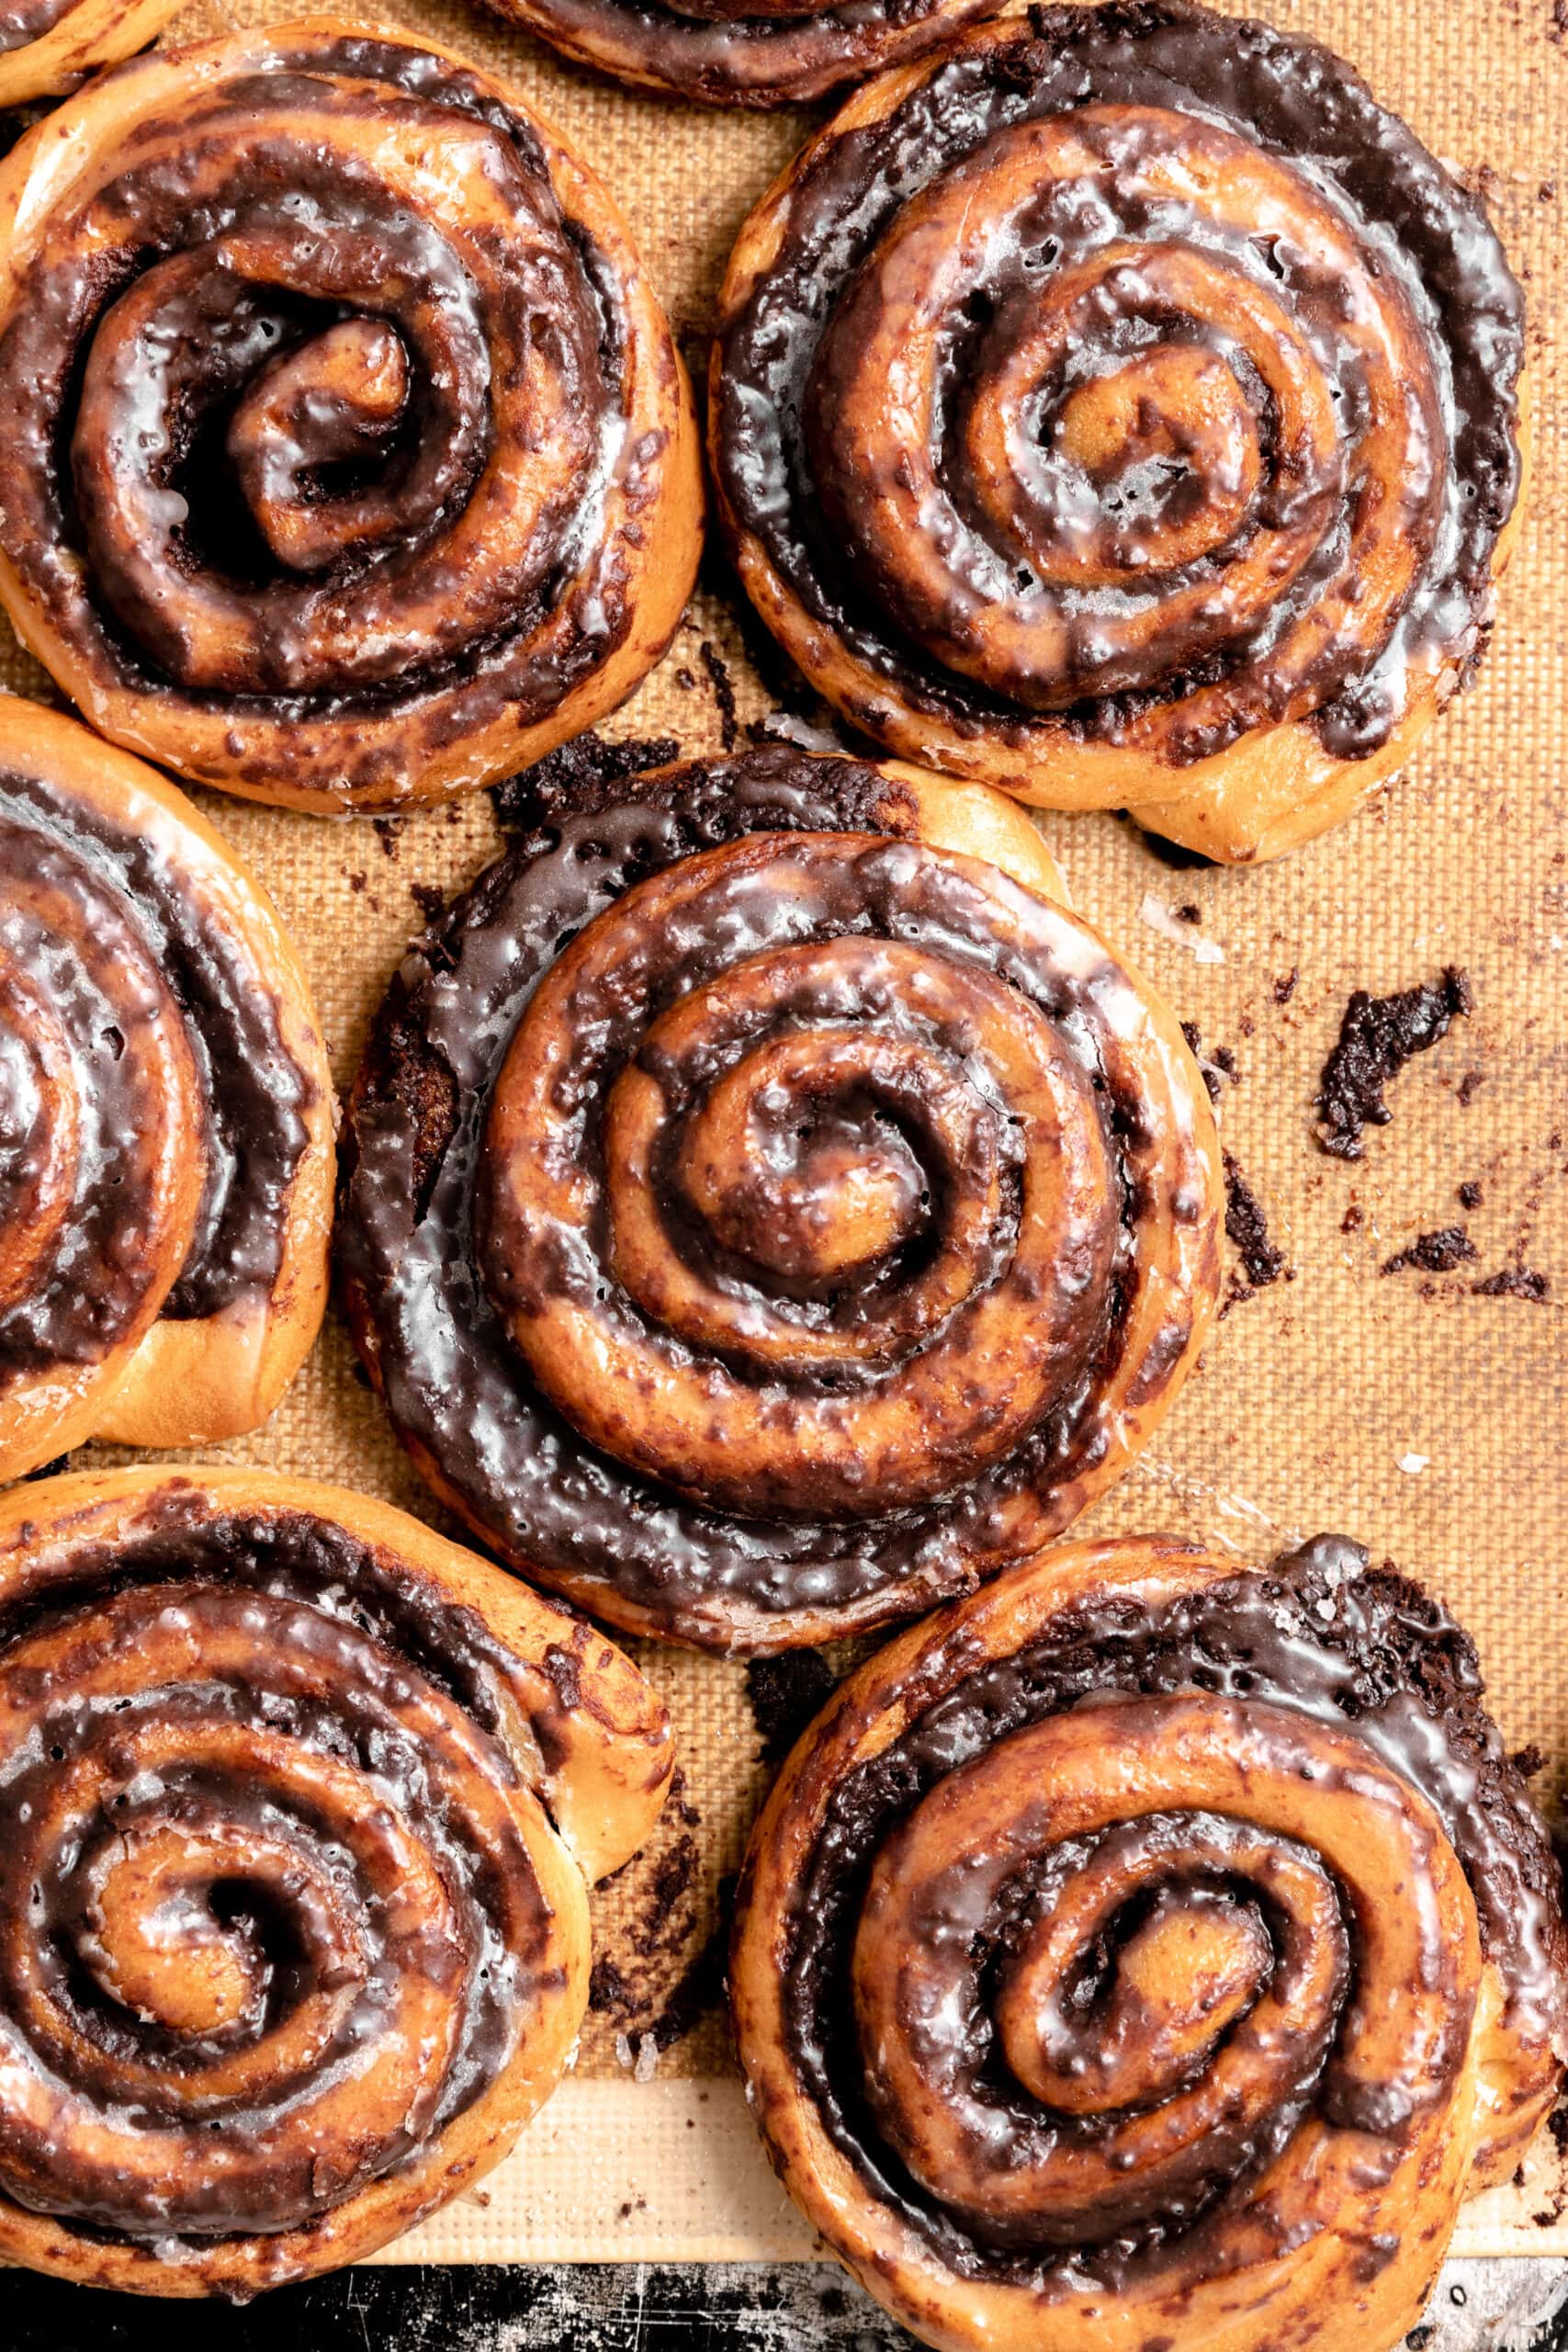 Overhead image of multiple schoko shcnecken/ chocolate pinwheels, side by side on a silicone baking mat.